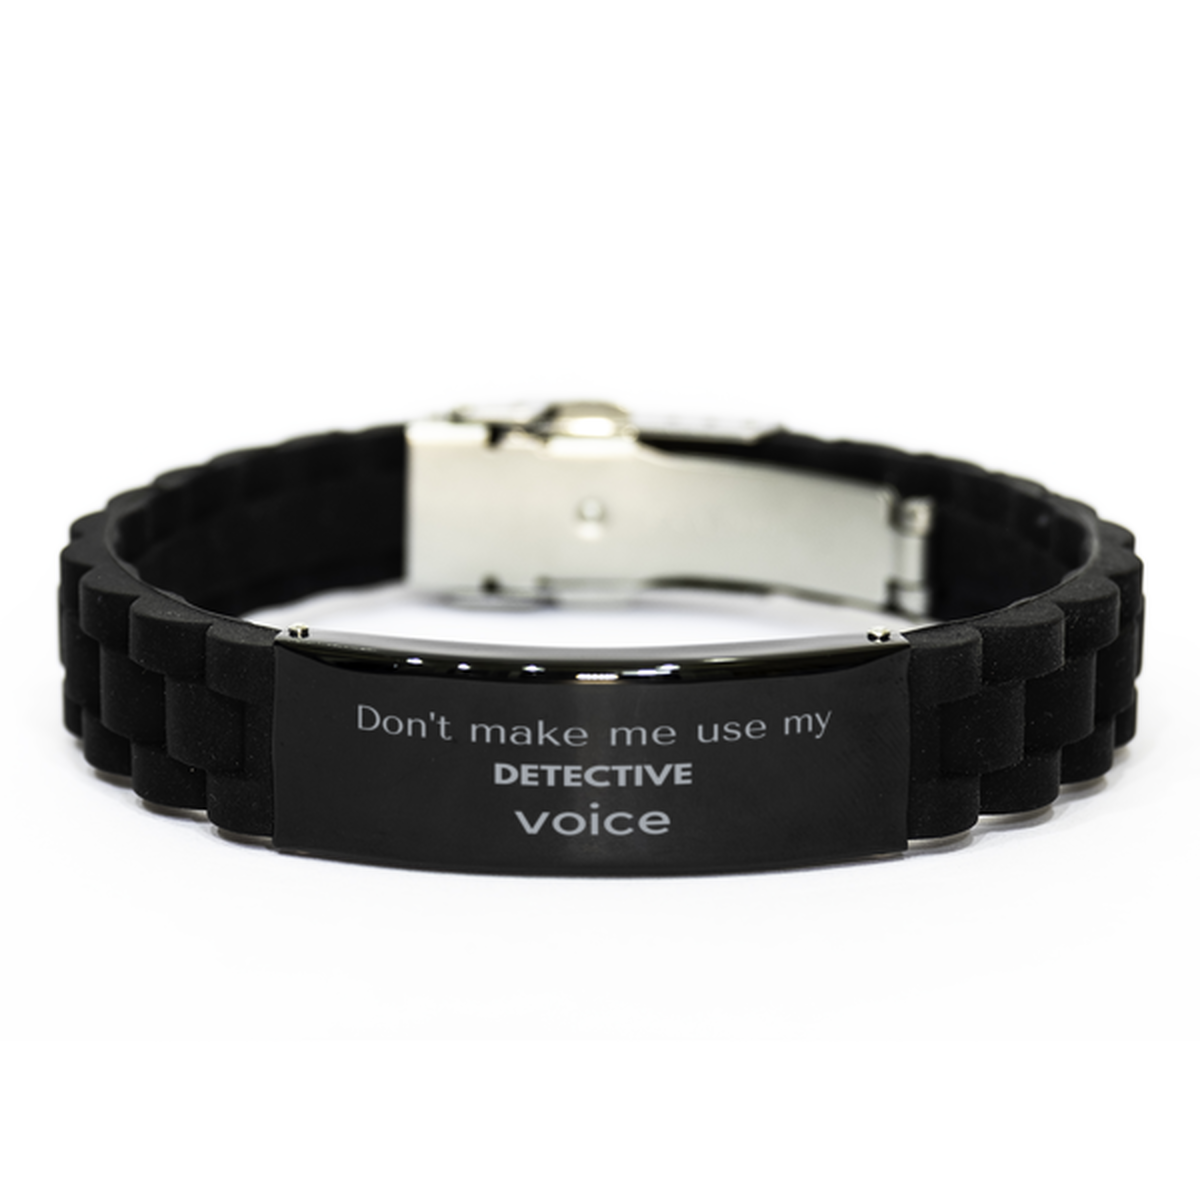 Don't make me use my Detective voice, Sarcasm Detective Gifts, Christmas Detective Black Glidelock Clasp Bracelet Birthday Unique Gifts For Detective Coworkers, Men, Women, Colleague, Friends